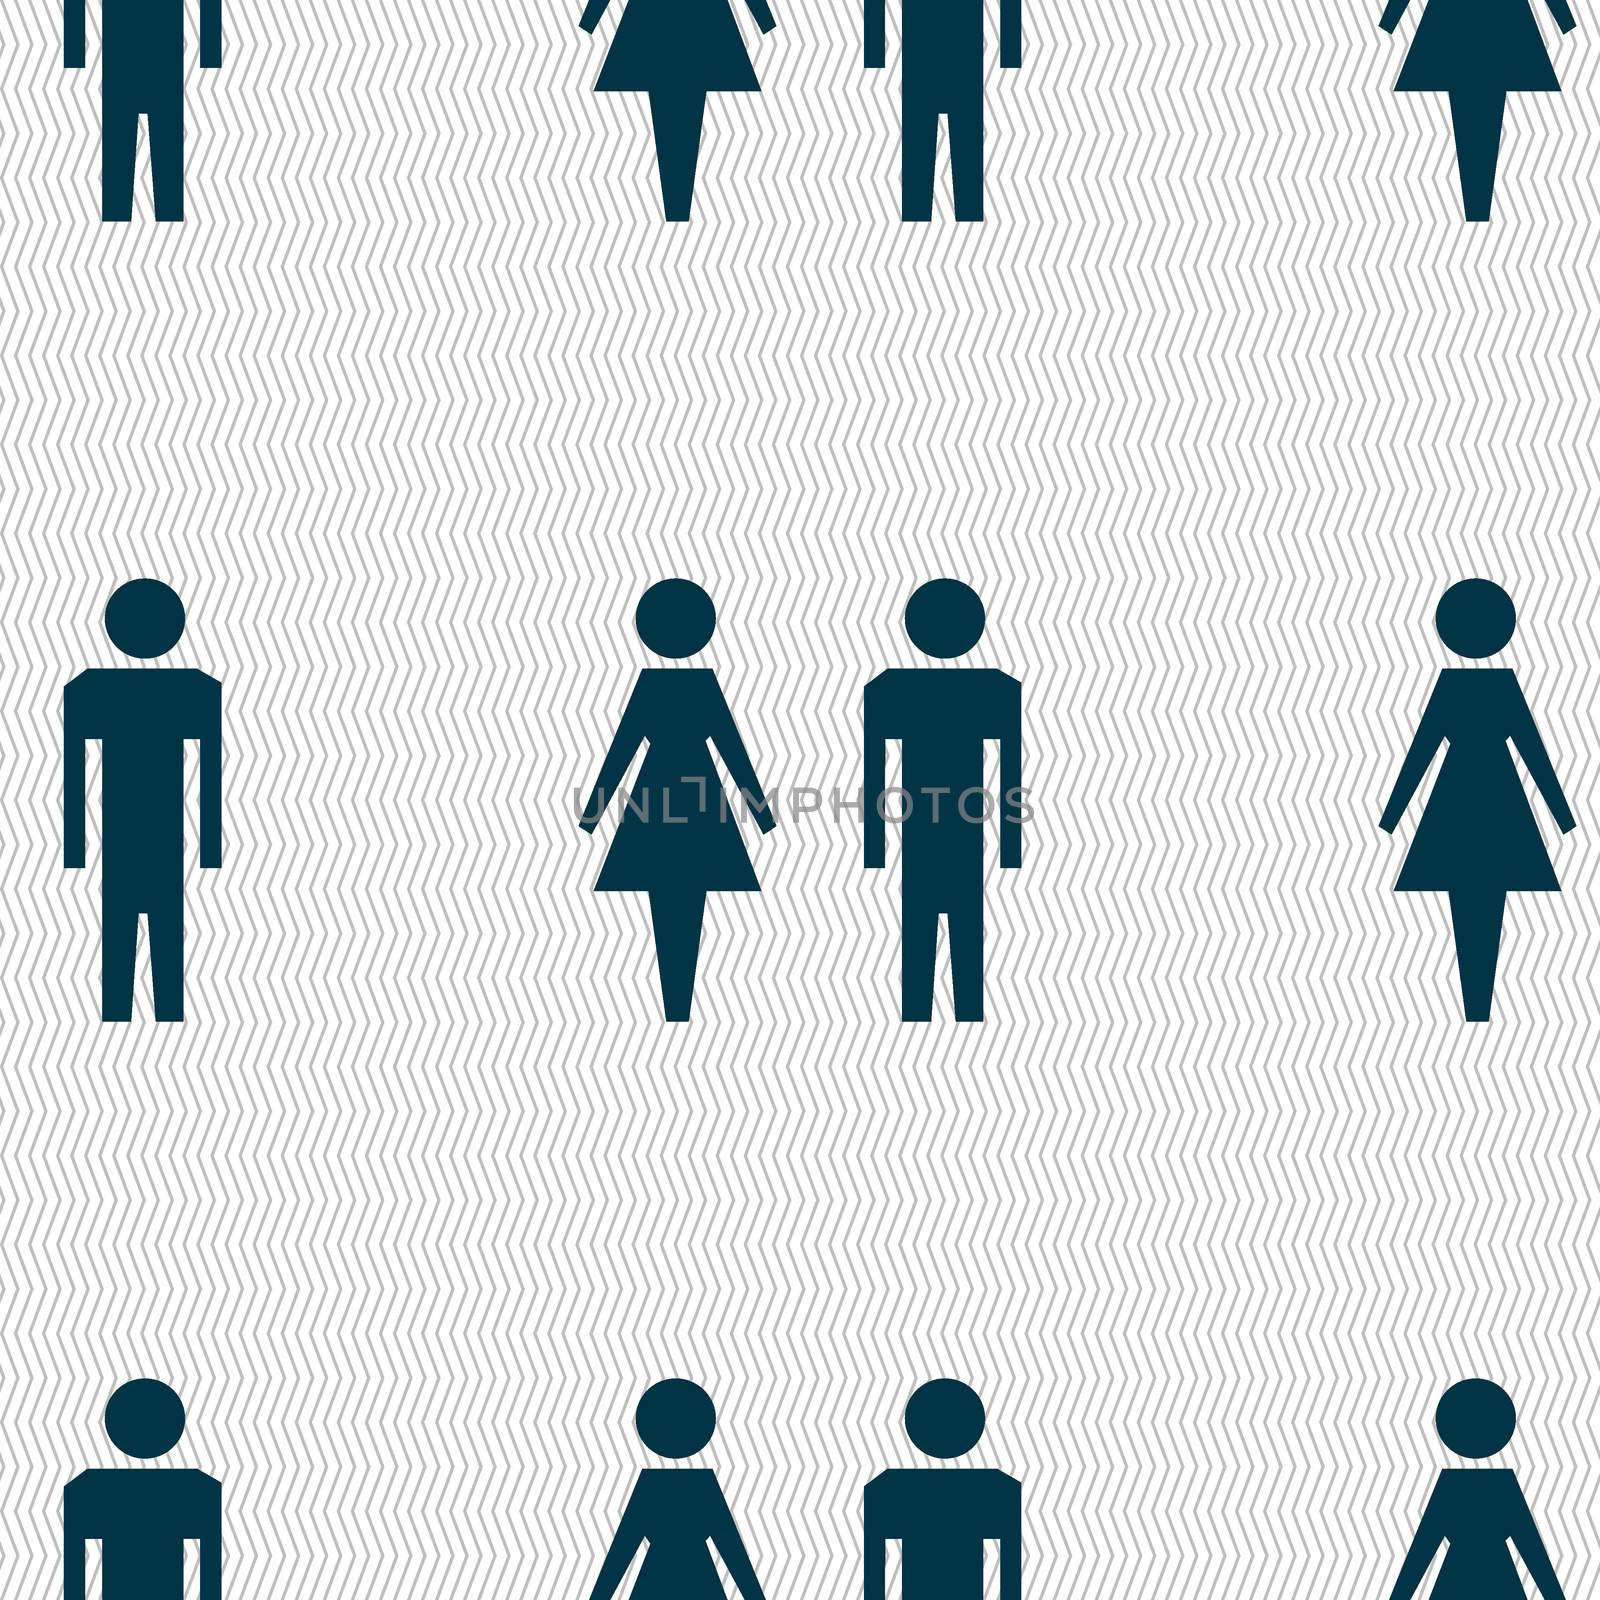 WC sign icon. Toilet symbol. Male and Female toilet. Seamless abstract background with geometric shapes. illustration